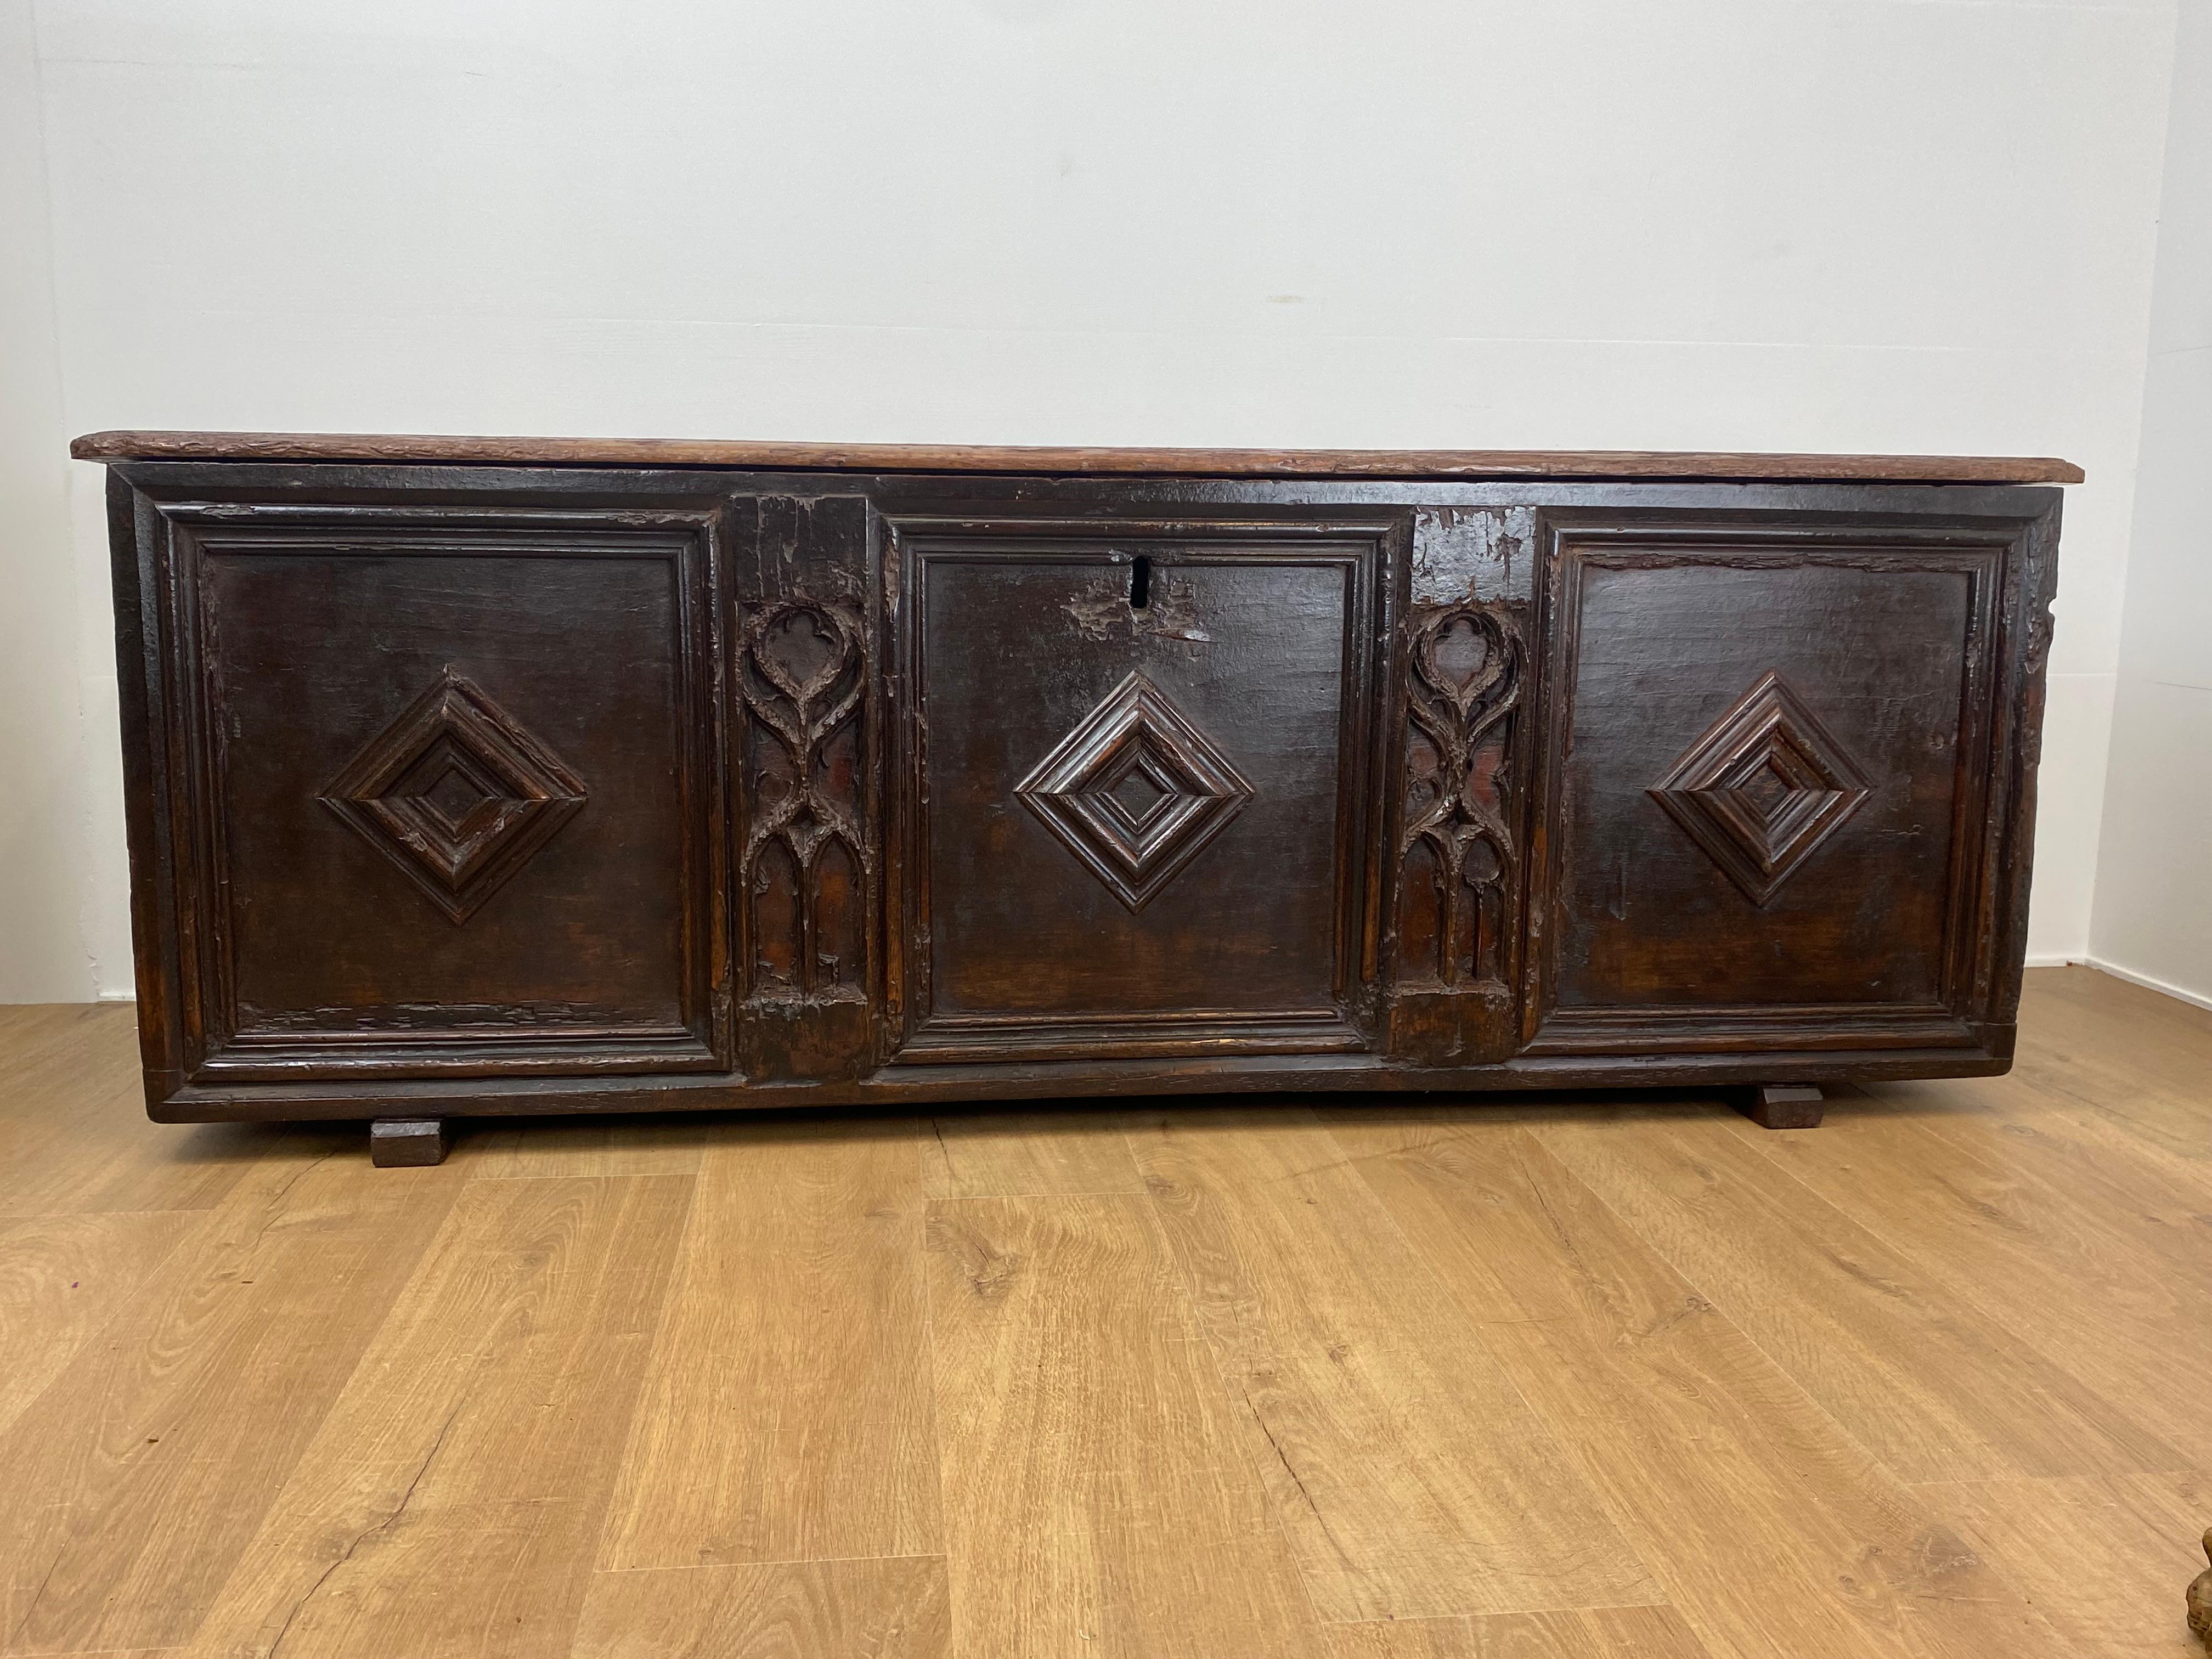 Exceptional Spanish Gothic Trunk from the early 16th century,
simple geometric lines and decorations,
good old patina and shine of the wood,
powerful piece of furniture,
ideal to combine with Contemporary Art.